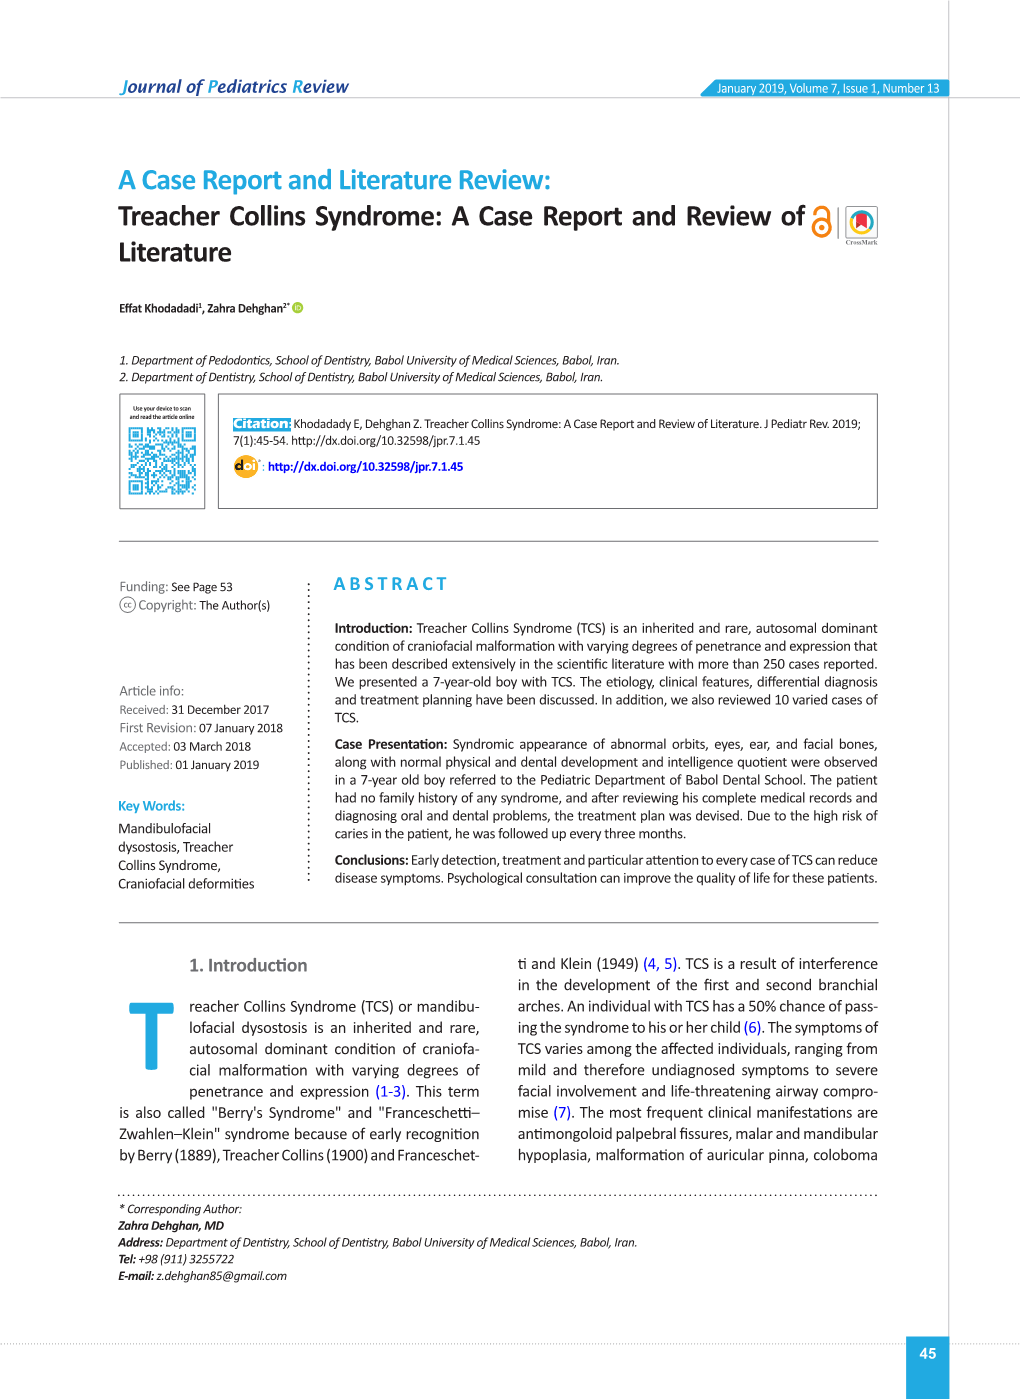 Treacher Collins Syndrome: a Case Report and Review of Literature